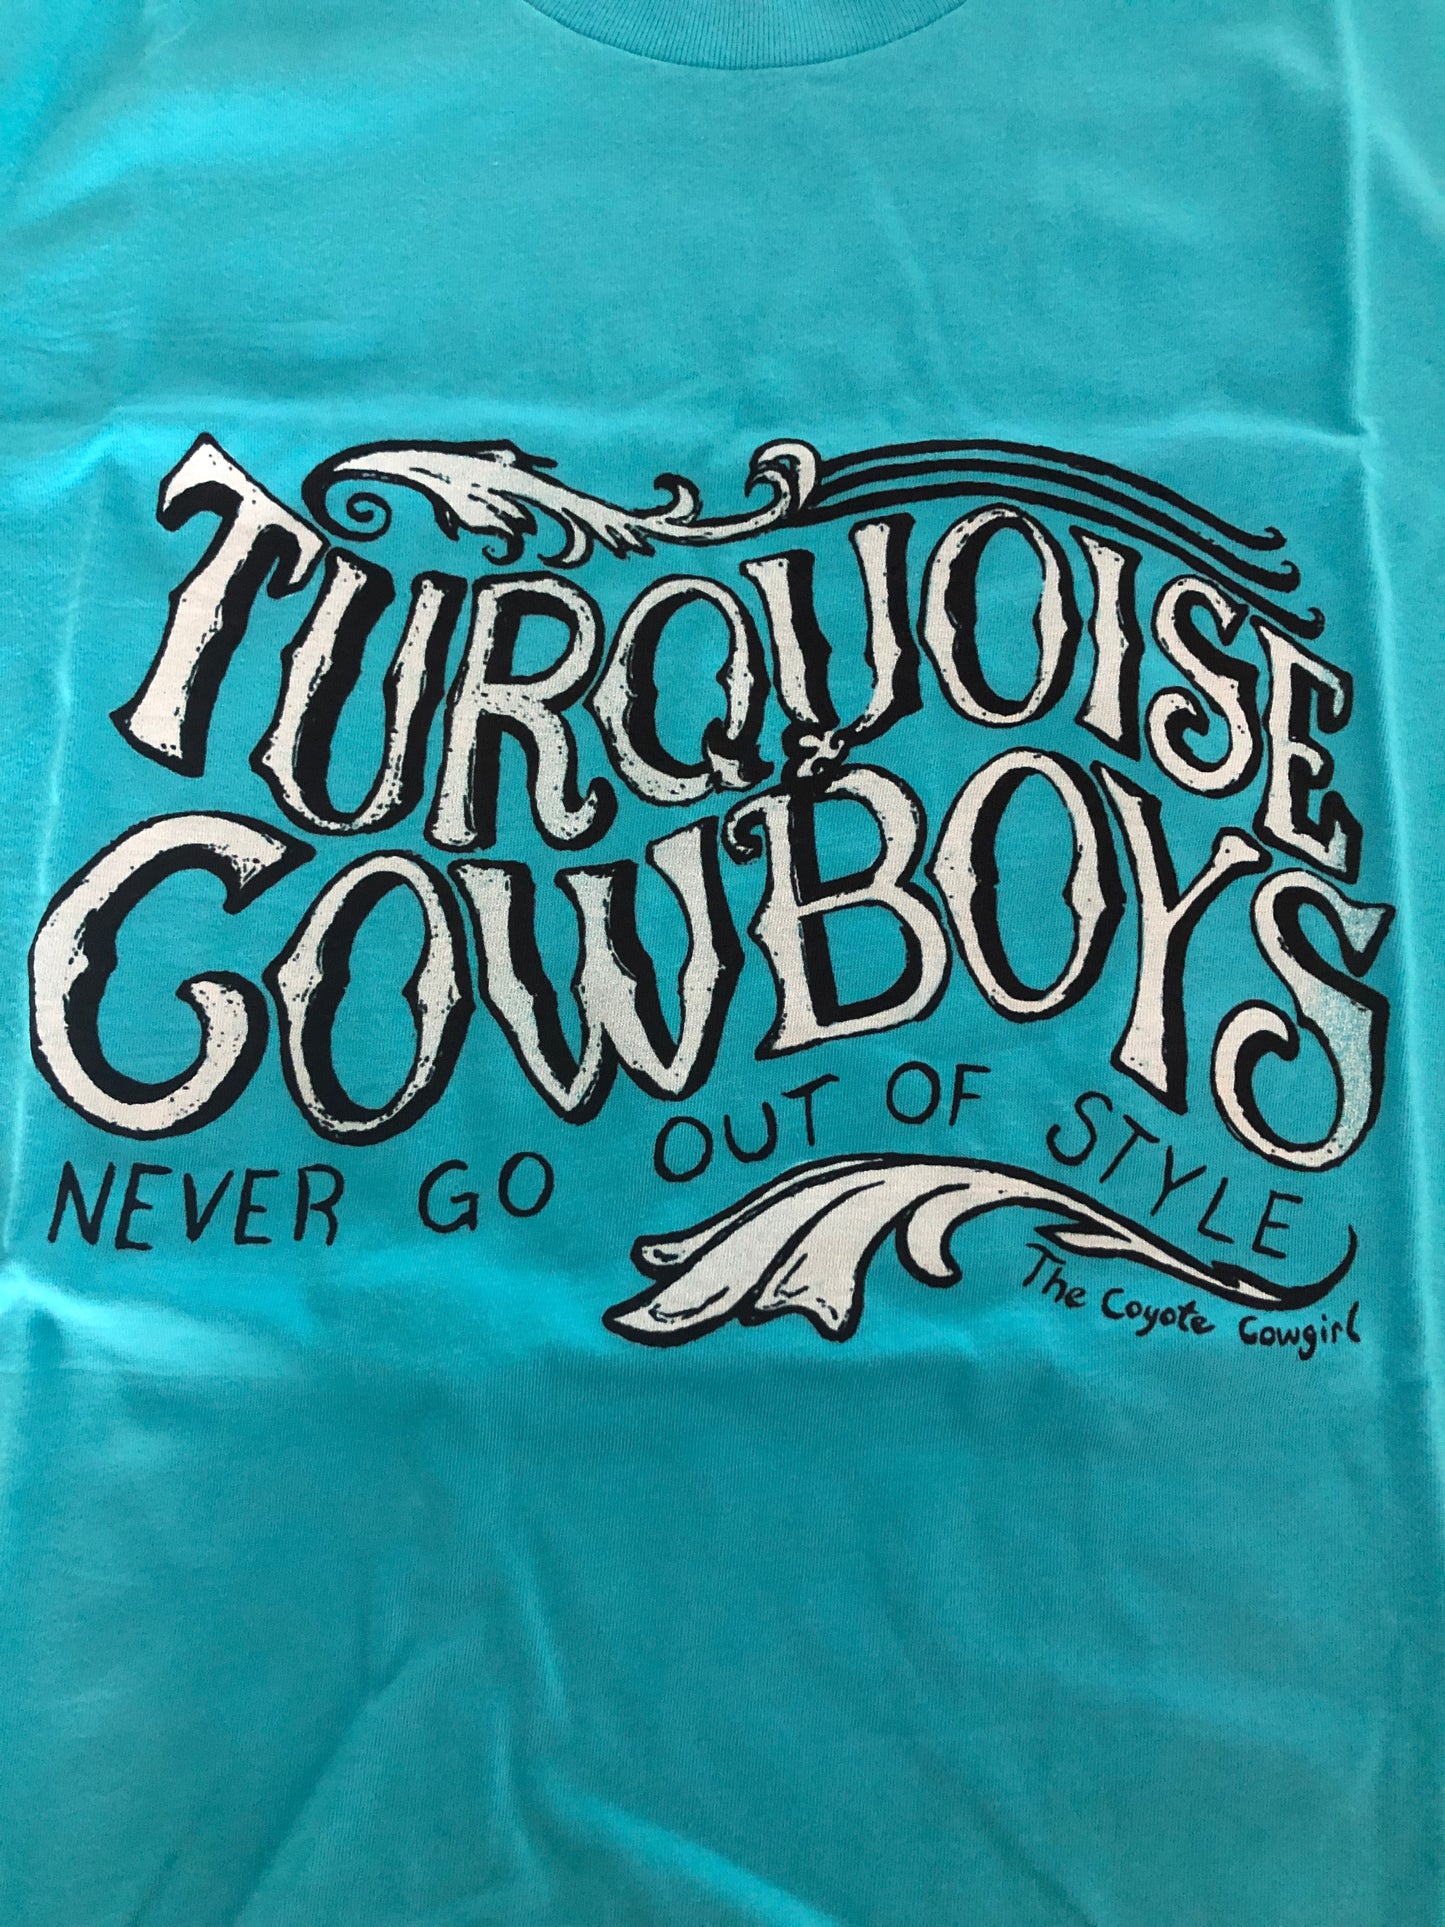 Turquoise and Cowboys